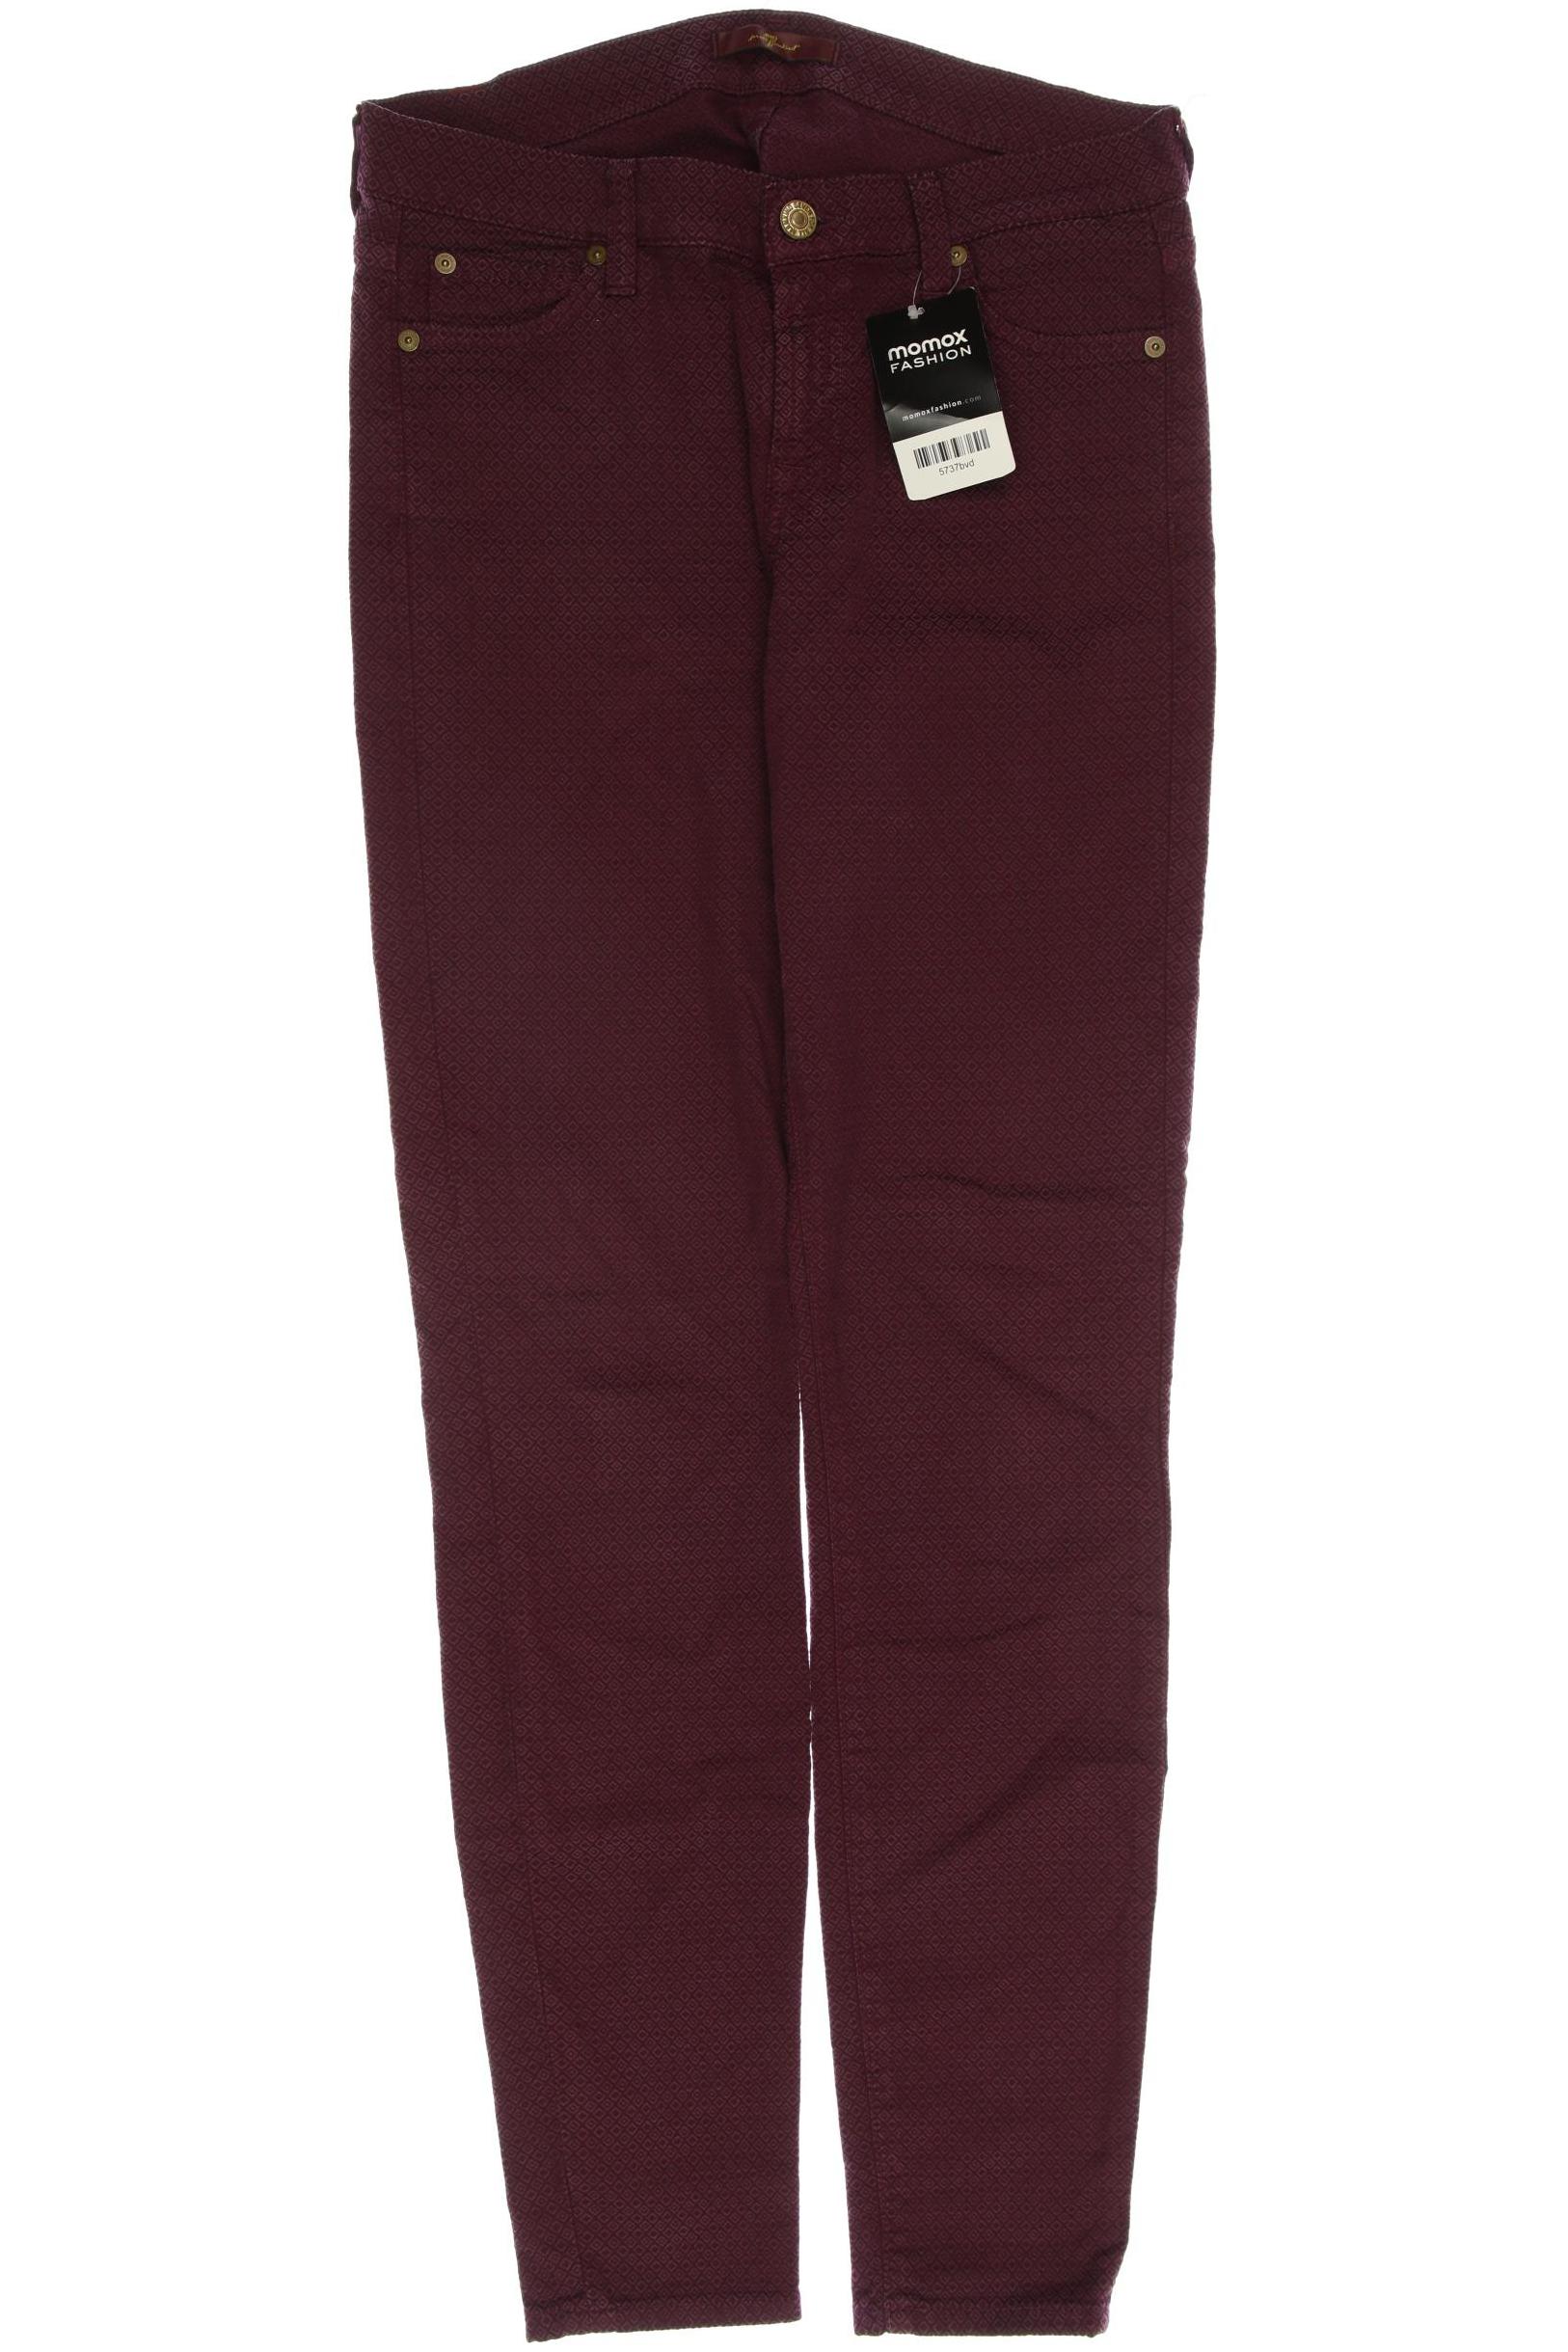 7 for all mankind Damen Stoffhose, bordeaux von 7 For All Mankind